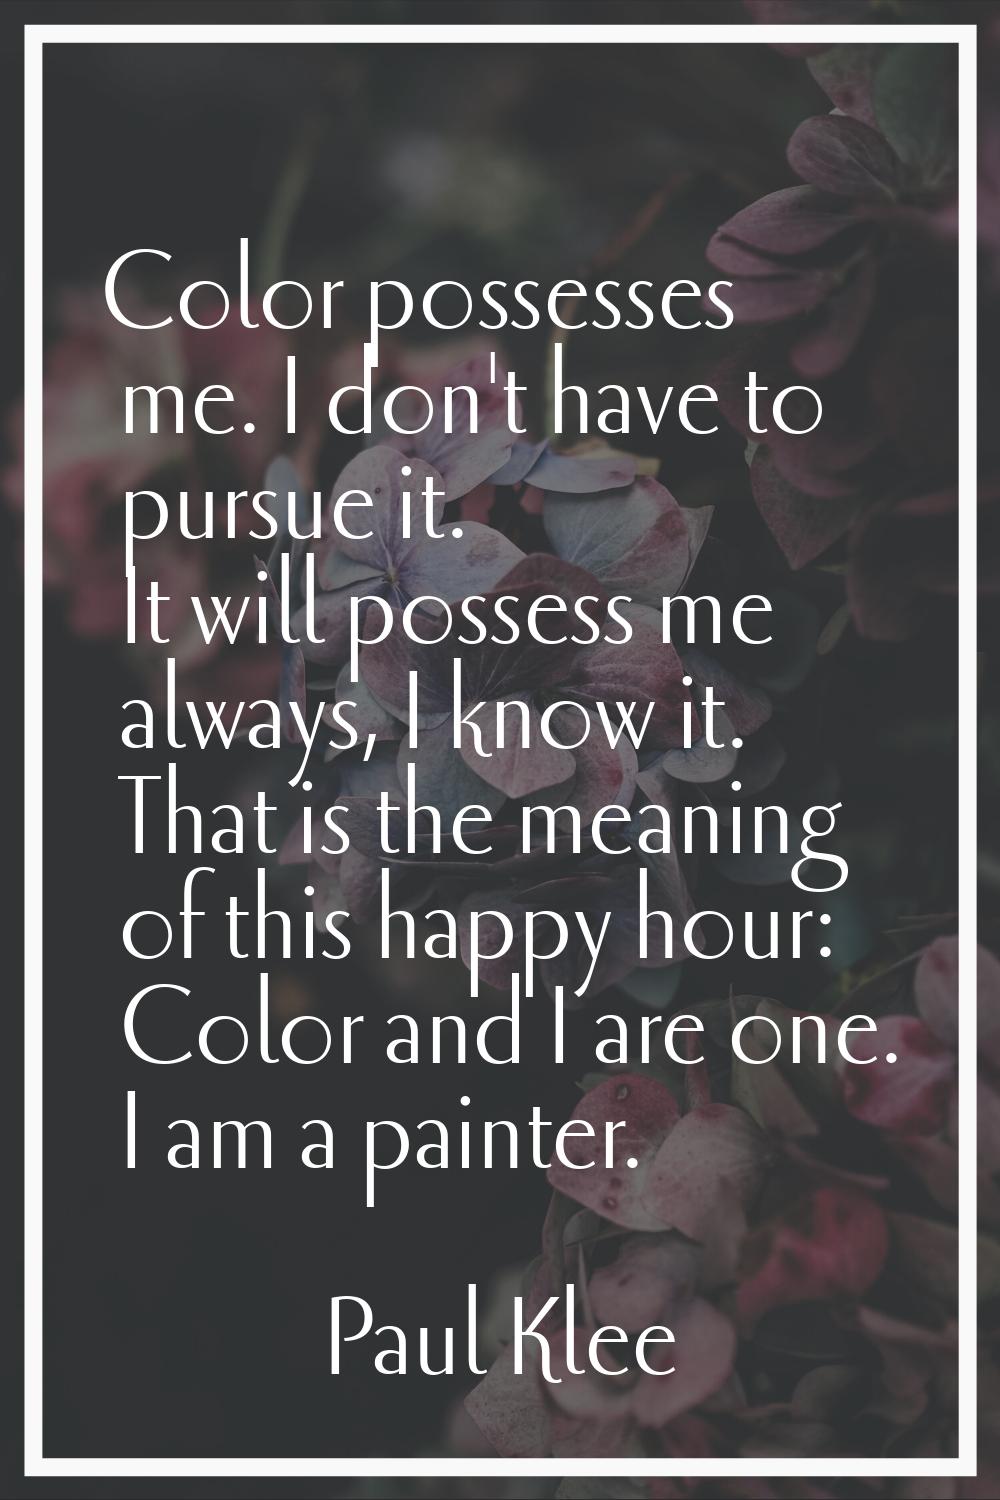 Color possesses me. I don't have to pursue it. It will possess me always, I know it. That is the me